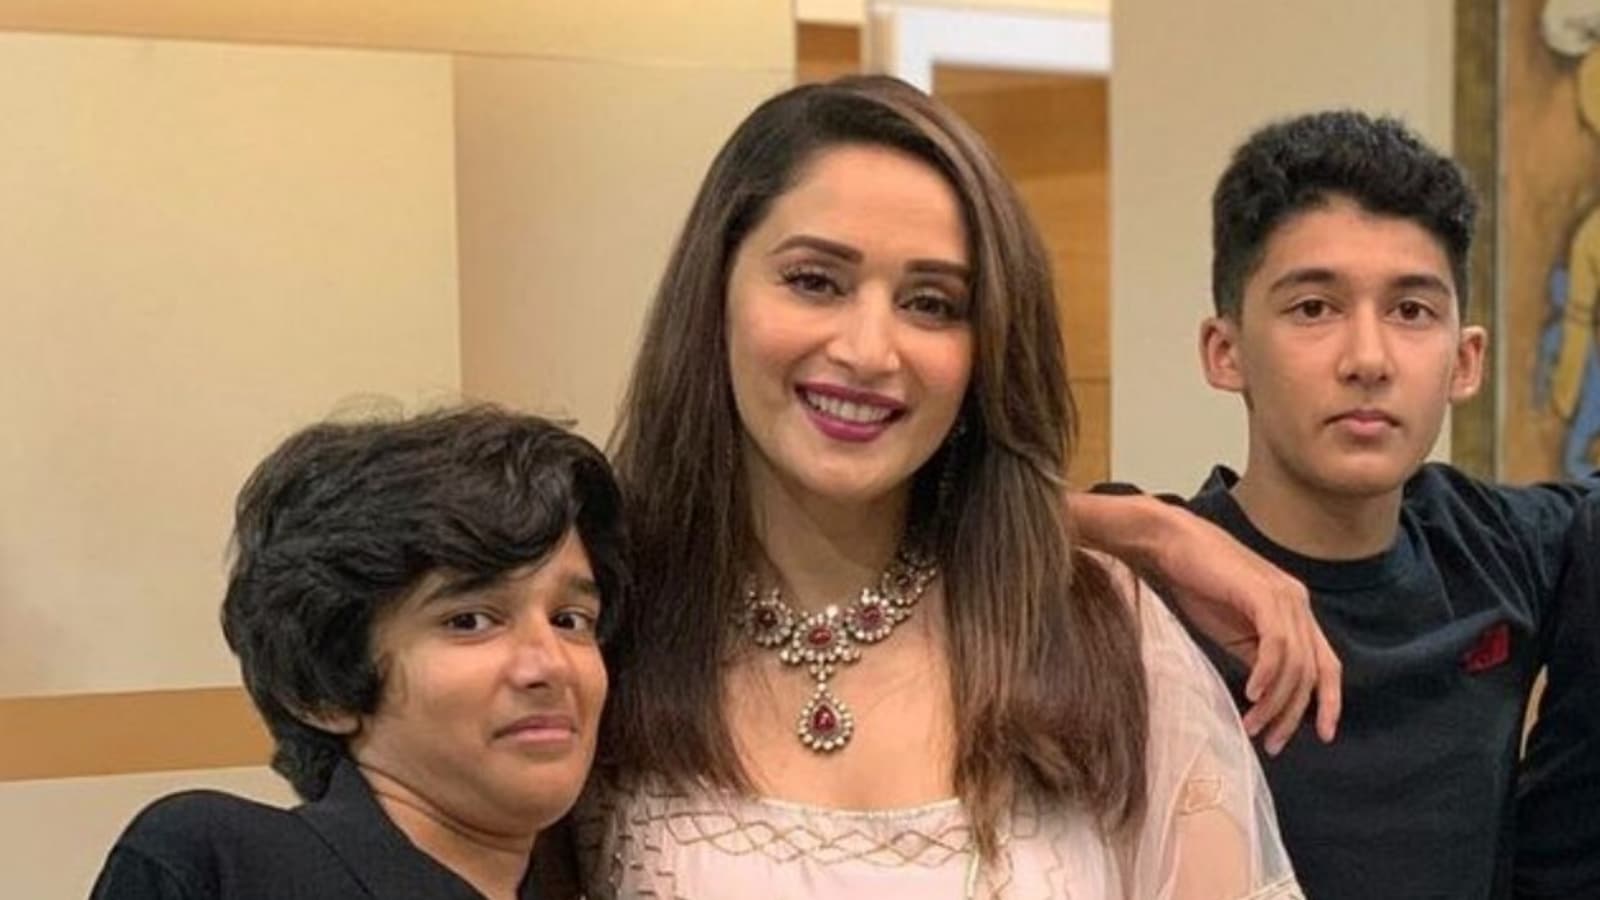 Madhuri Xx Video - Madhuri Dixit recalls when her son's friend said: 'You're lucky she is your  mom' | Bollywood - Hindustan Times